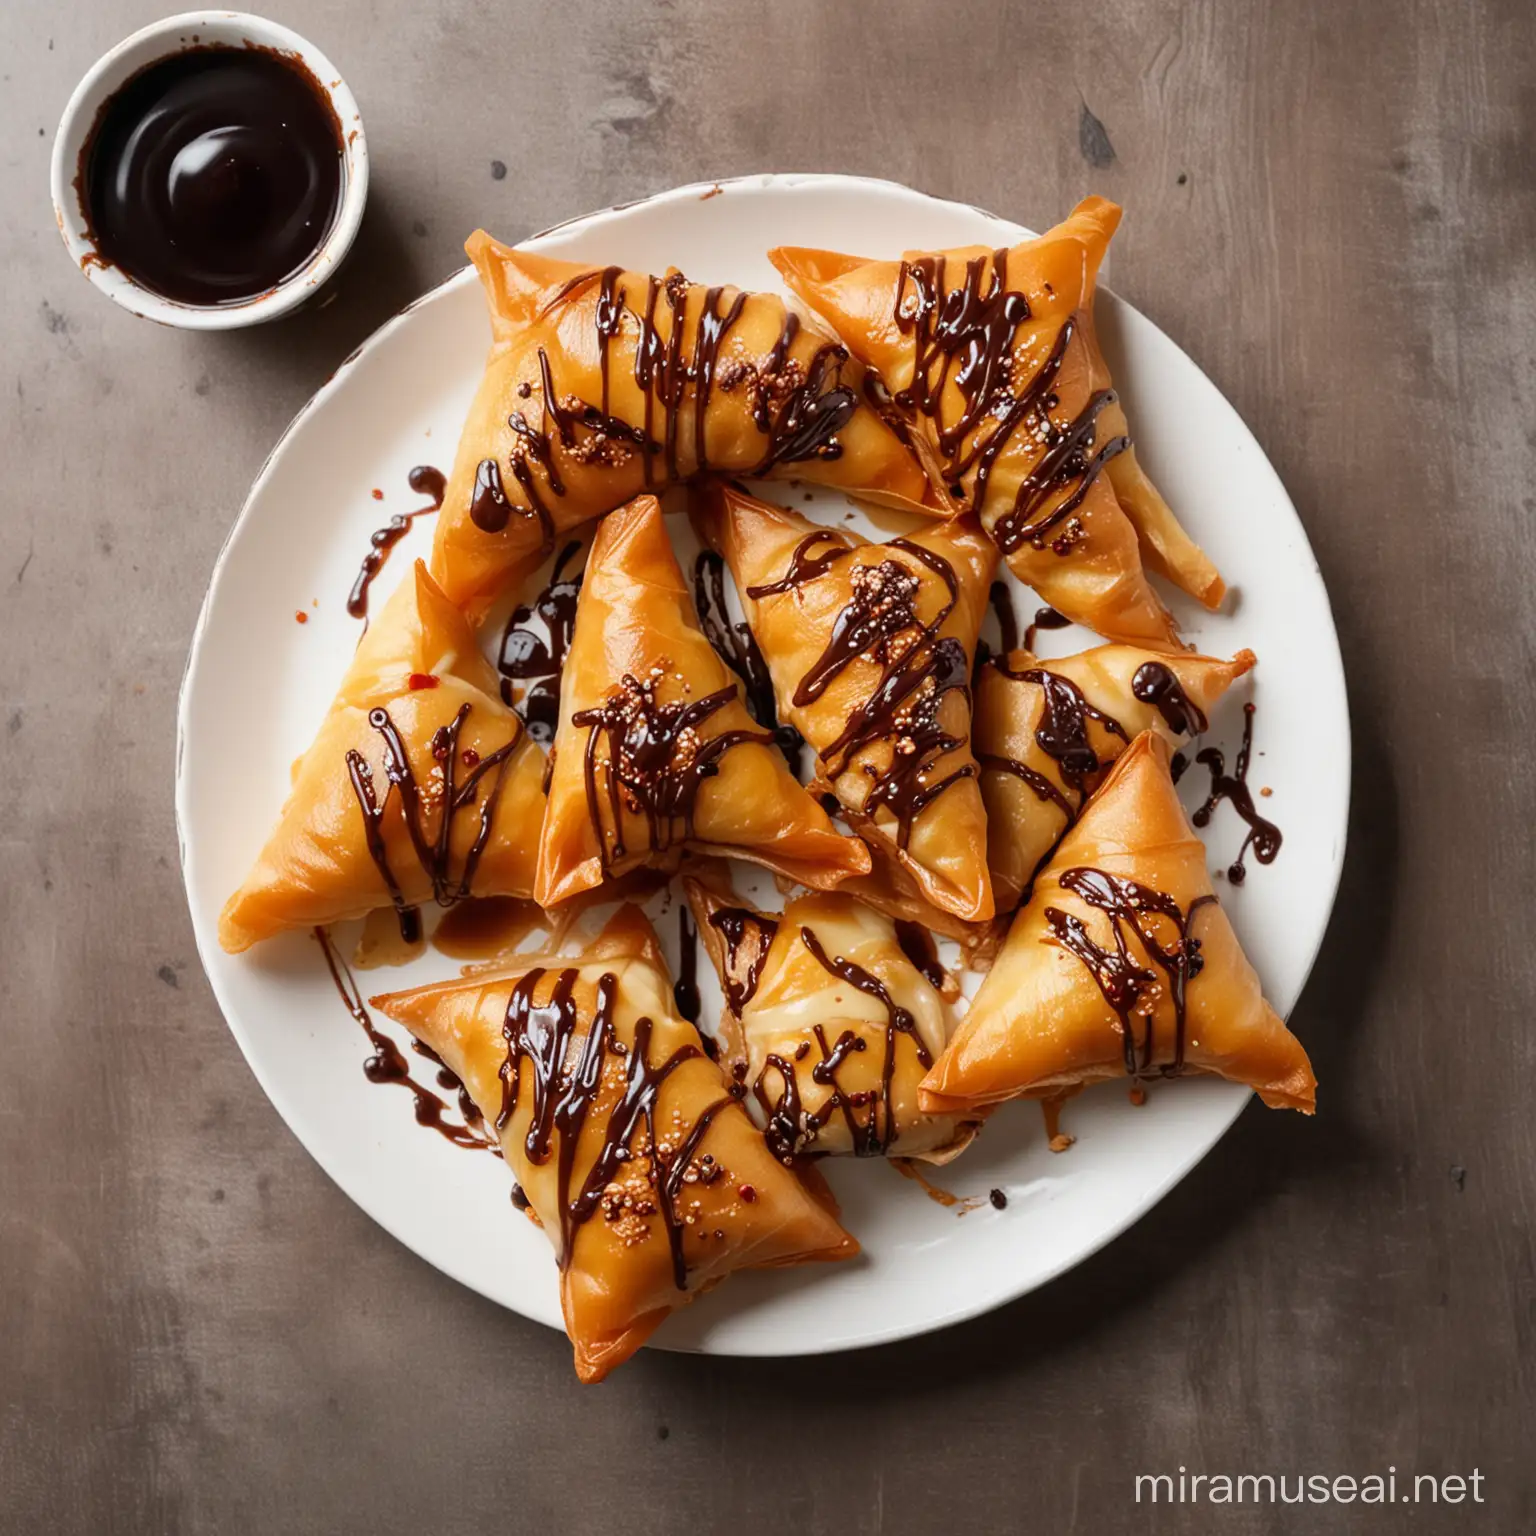 Pictures of a triangular shaped Camote turon with toppings of chocolate syrup